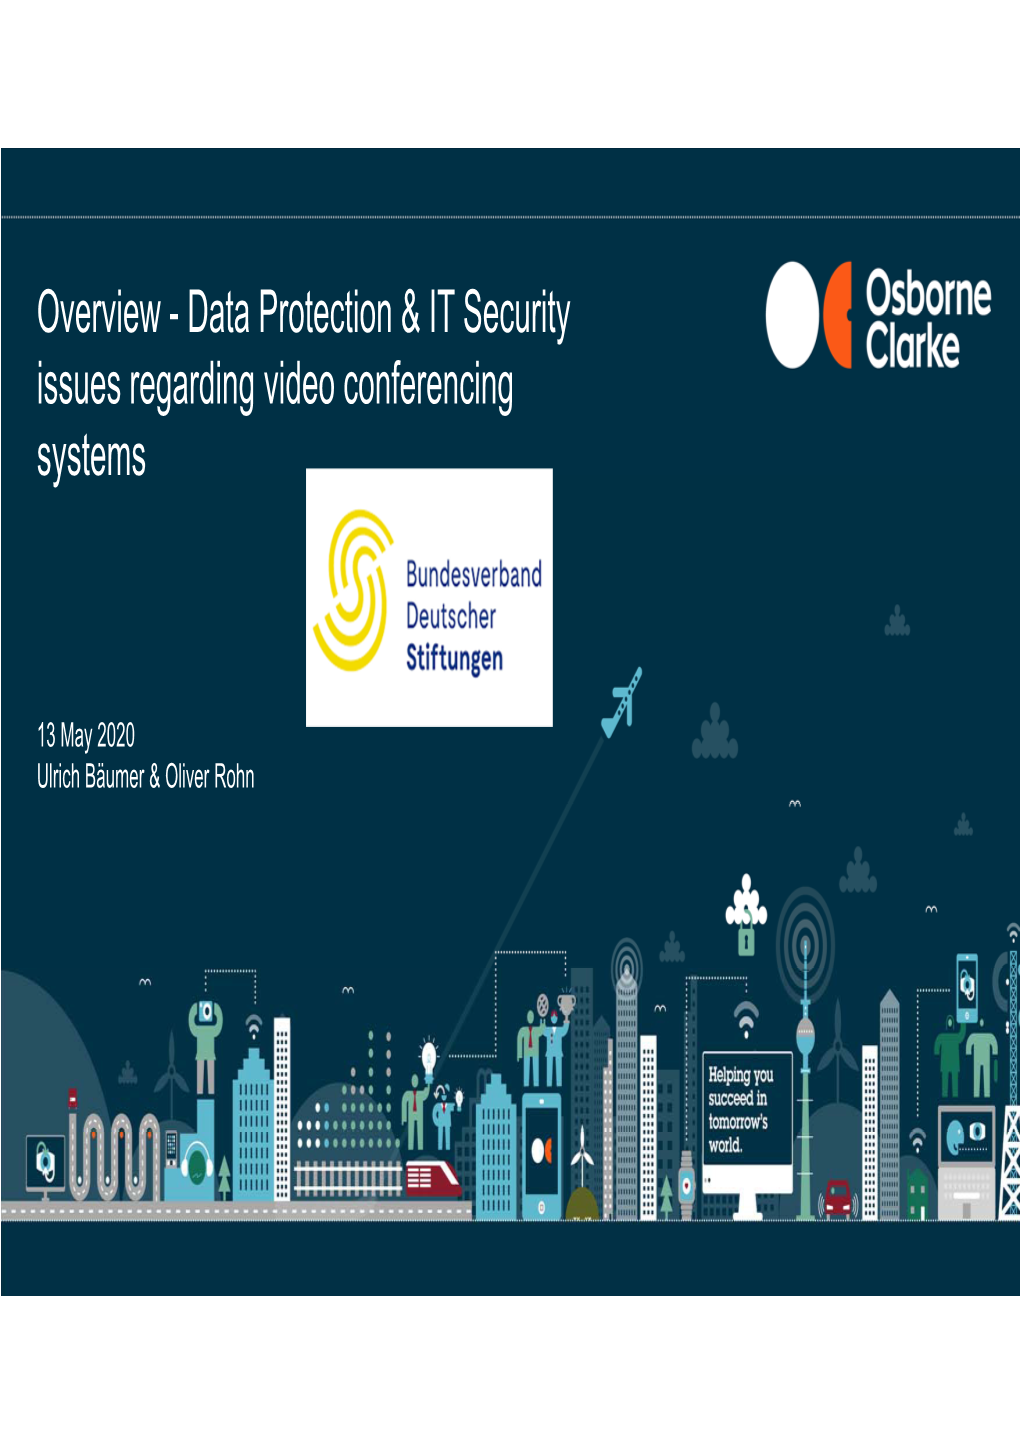 Overview - Data Protection & IT Security Issues Regarding Video Conferencing Systems